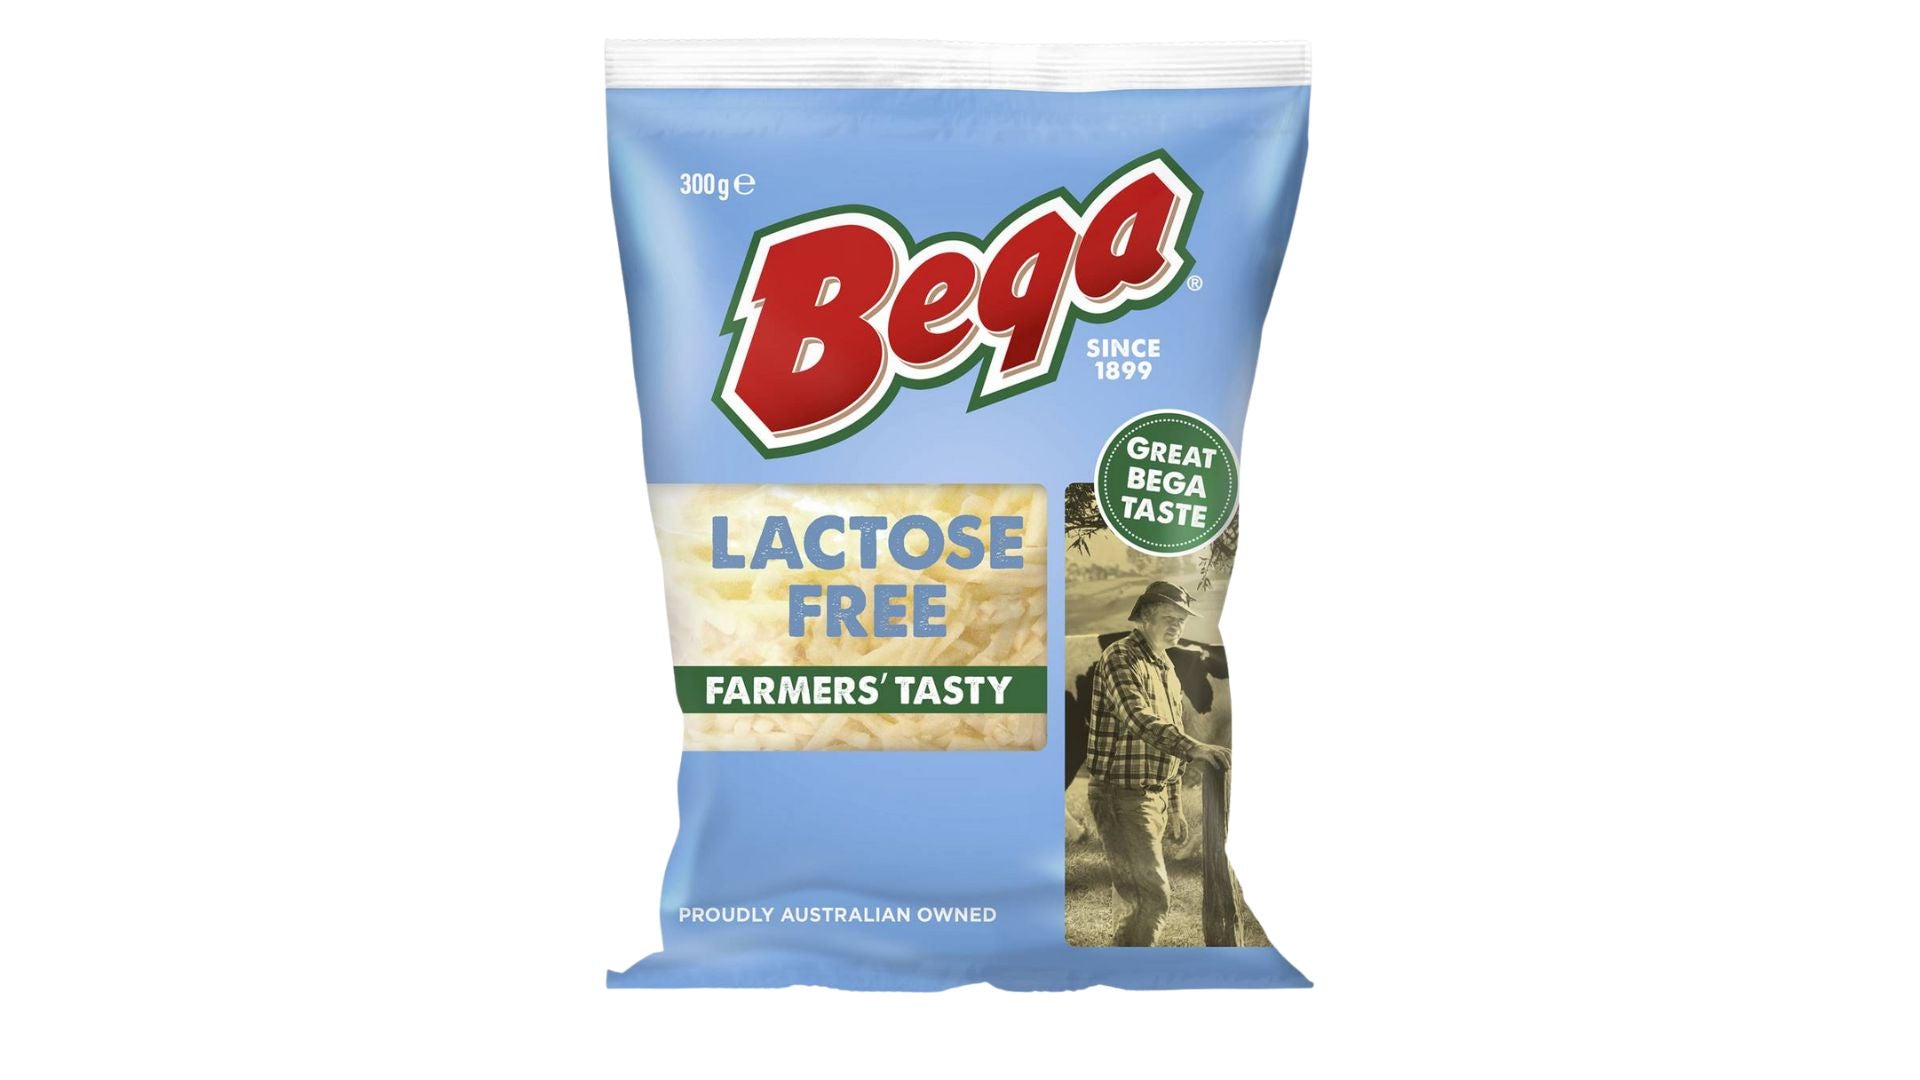 Bega Lactose Free Grated Tasty Cheese 300g